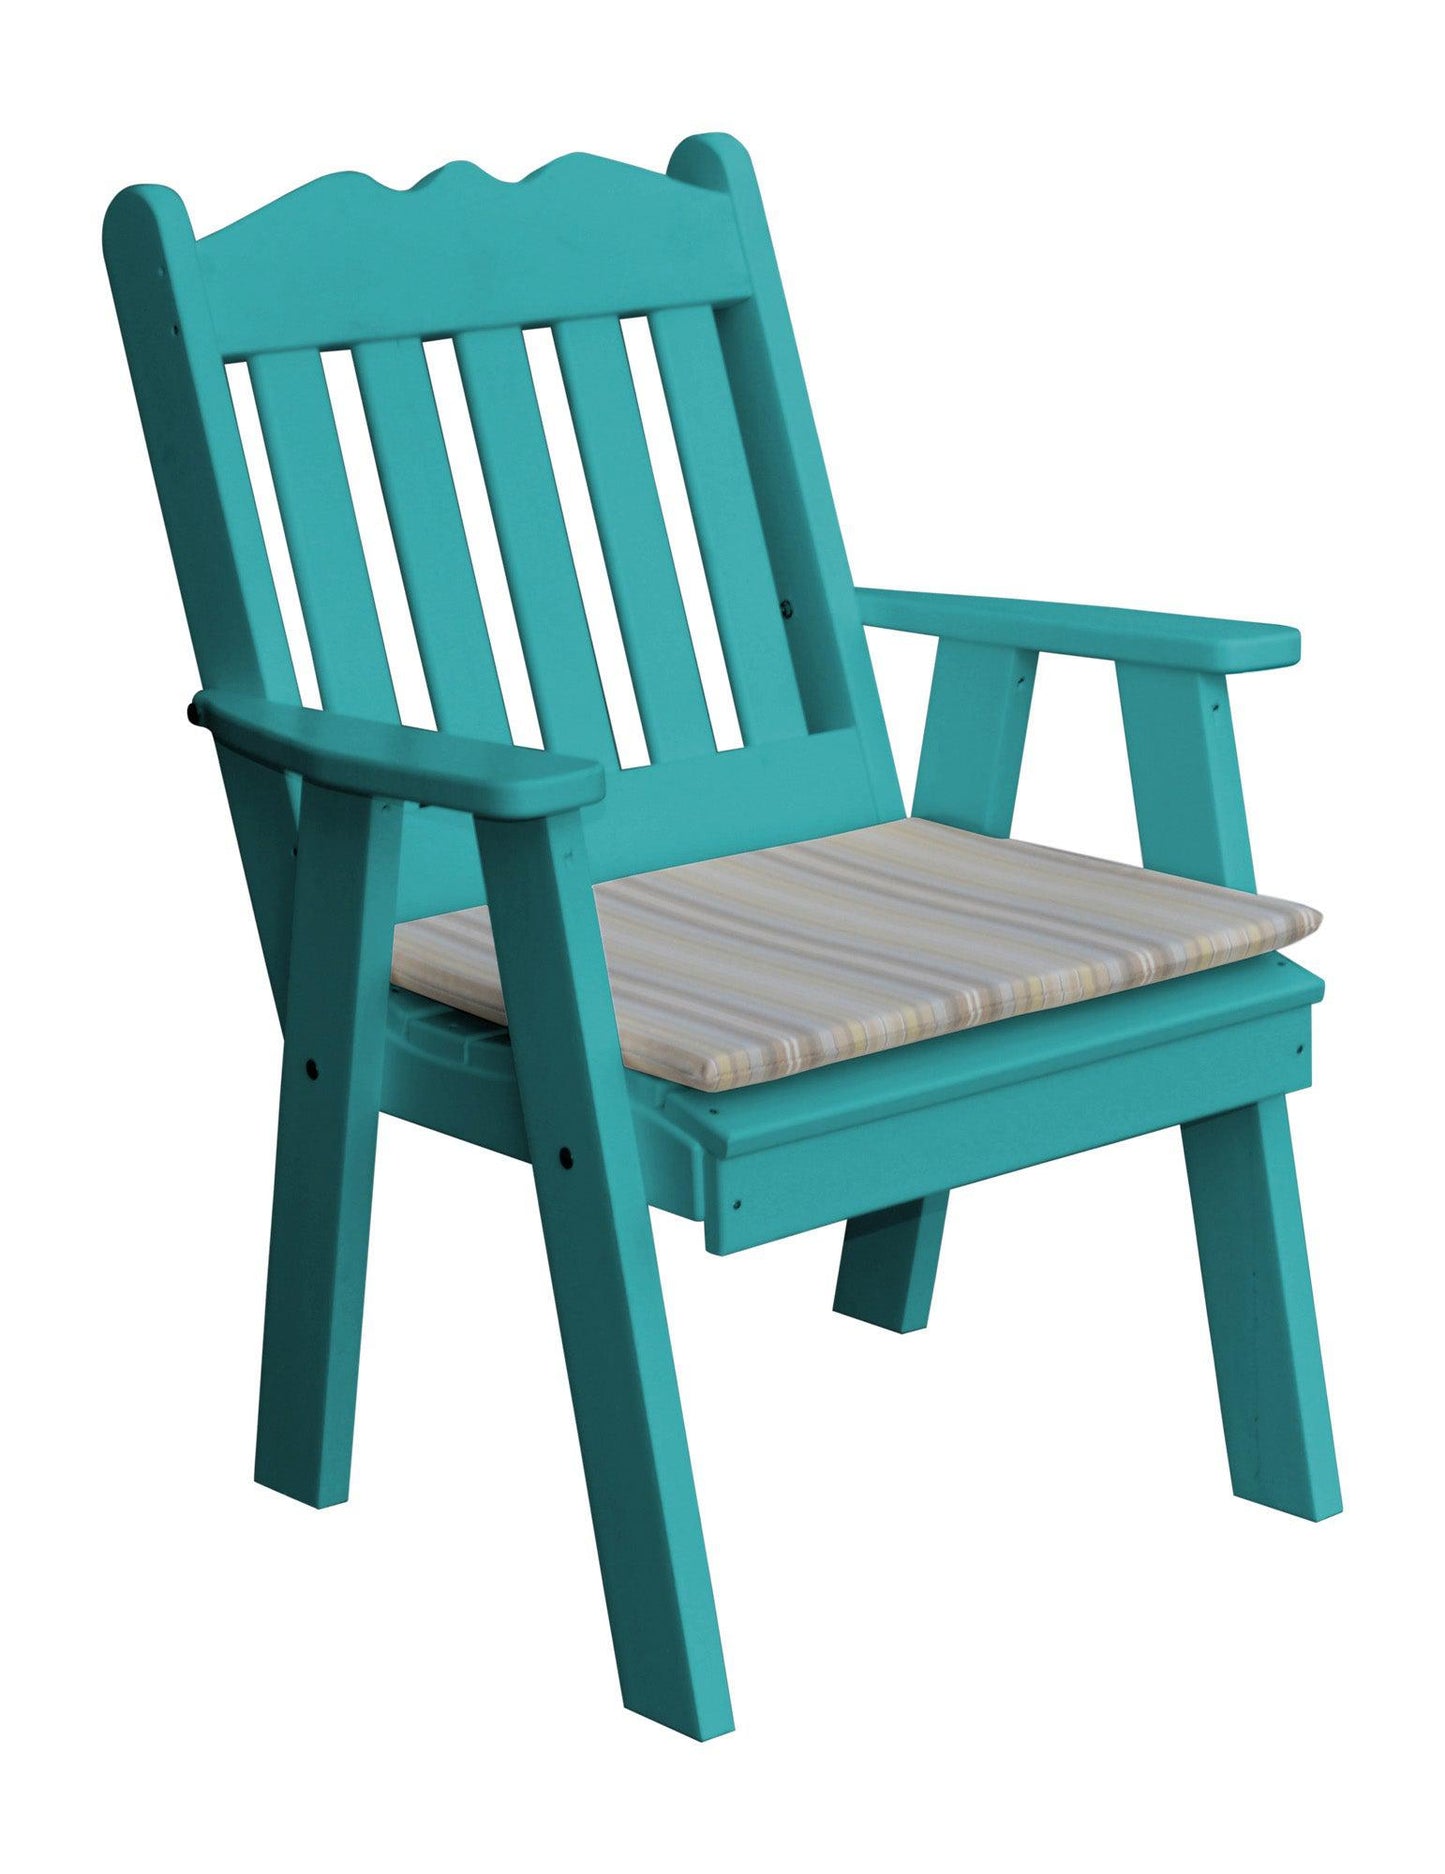 A&L Furniture Company Recycled Plastic Royal English Deck Chair - LEAD TIME TO SHIP 10 BUSINESS DAYS